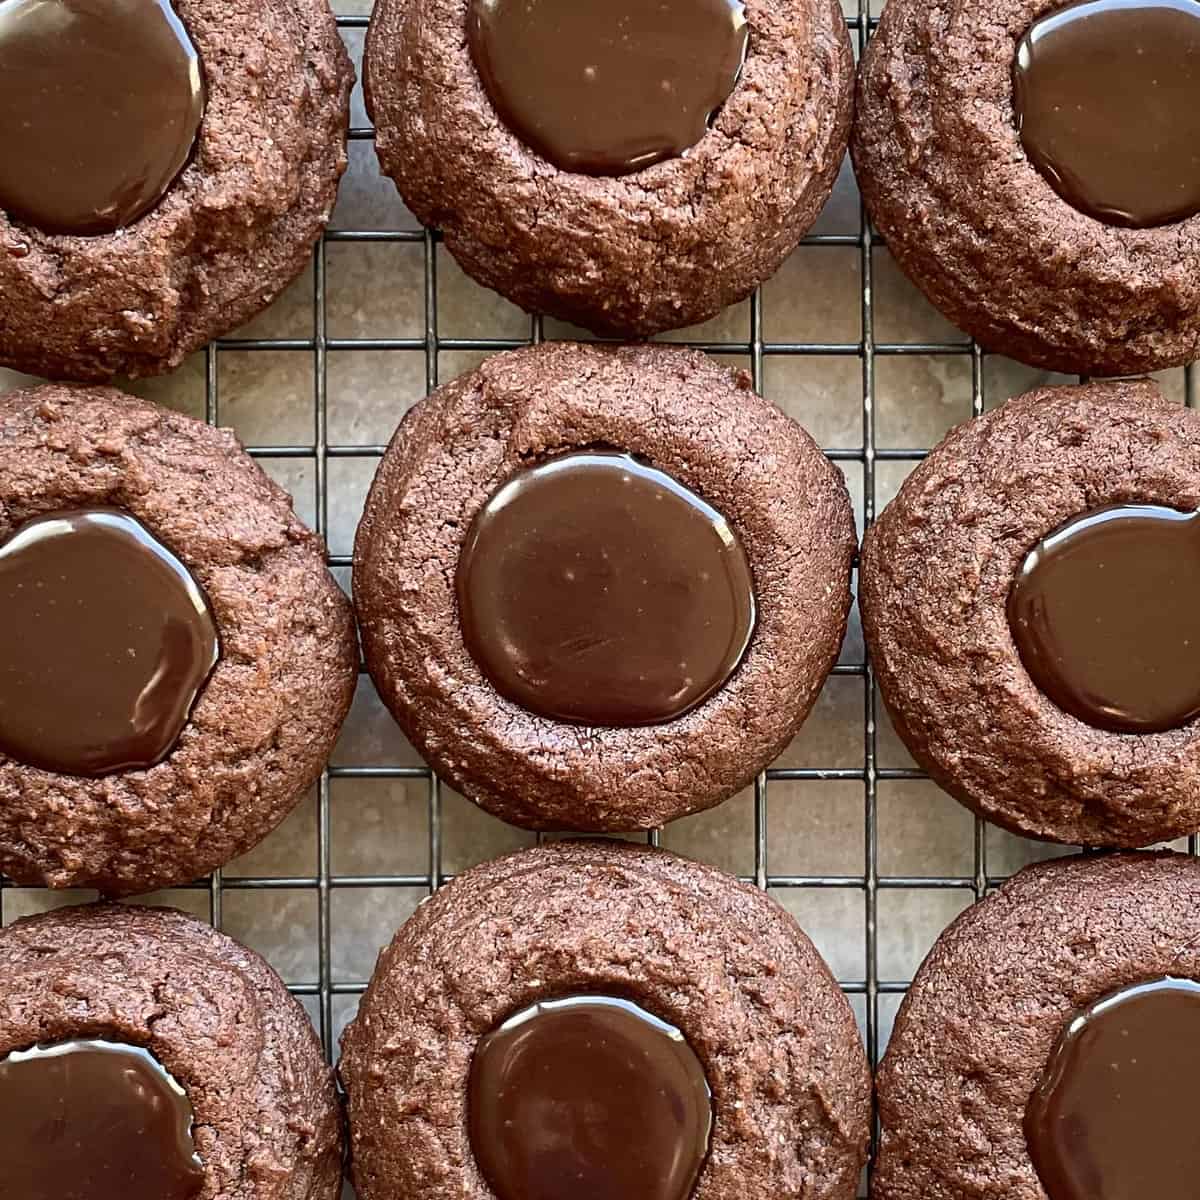 nine brown thumbprint cookies filled with a shiny chocolate brown filling.